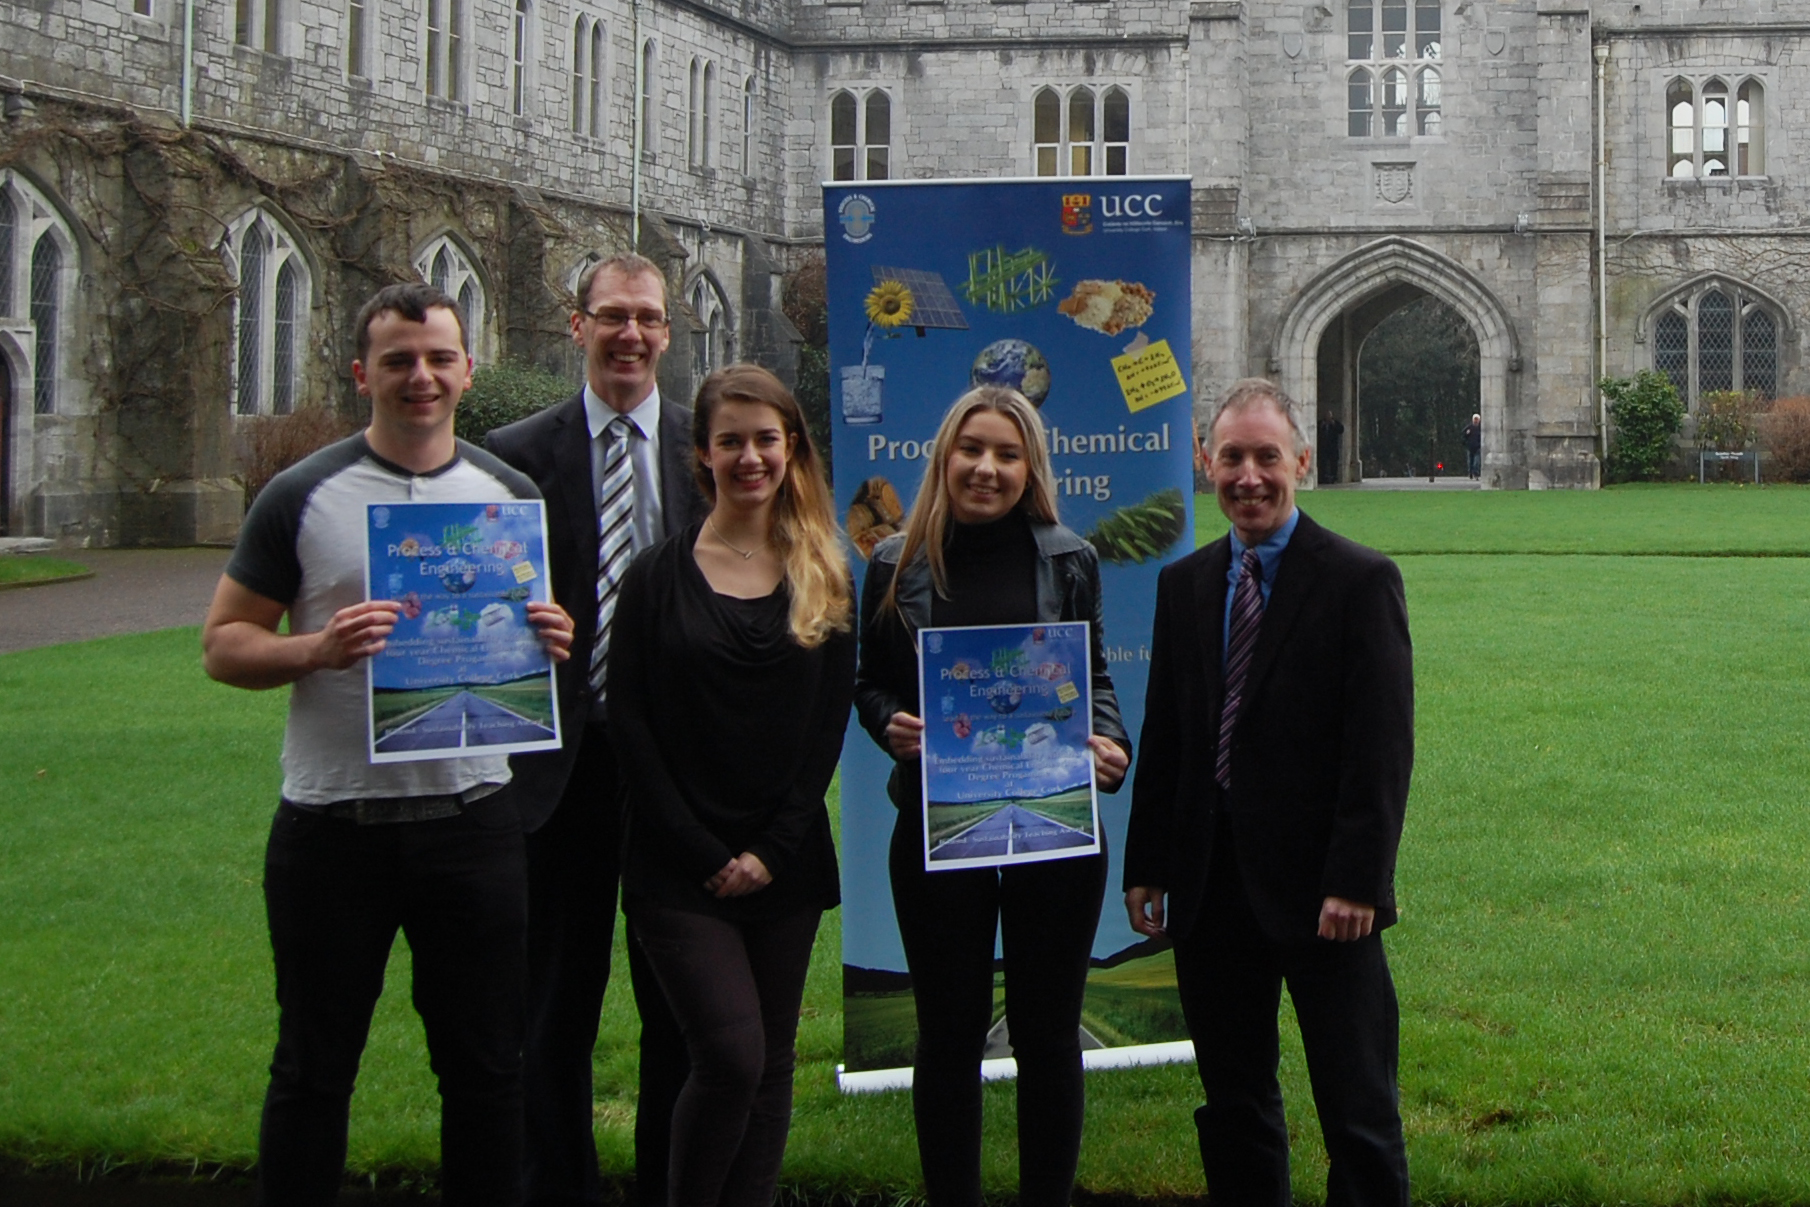 International recognition for UCC’s Process & Chemical Engineering programme: Winner of the IChemE Sustainability Teaching Award 2016